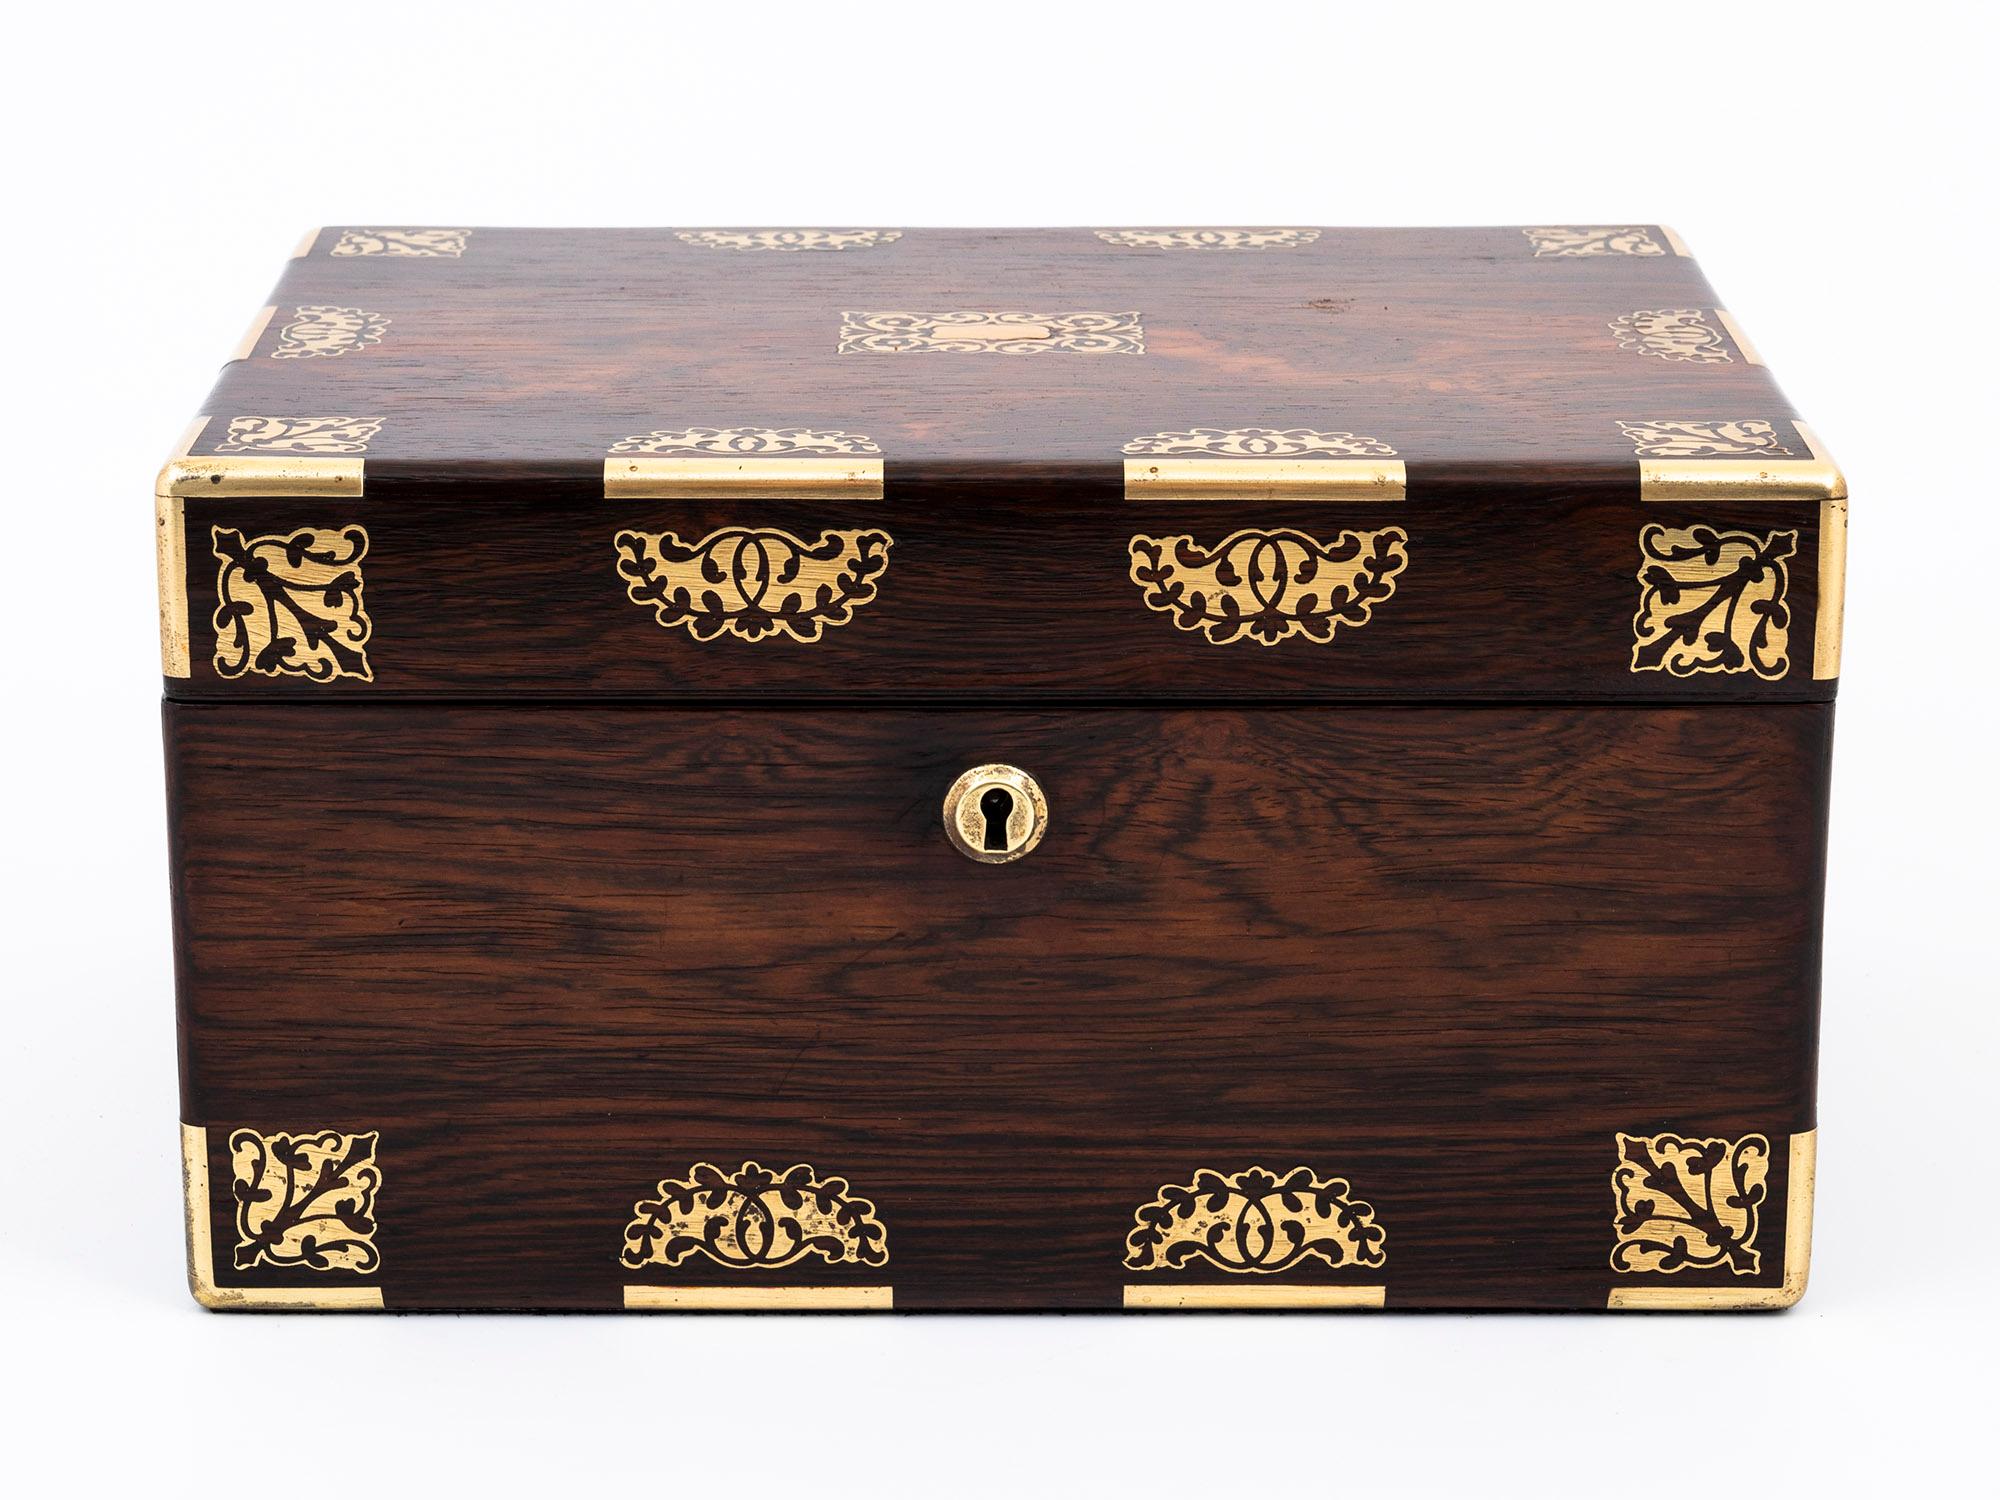 The following is a truly remarkable Antique Rosewood Jewellery Box, boasting an unparalleled combination of style and practicality.

The top and front of the box are adorned with ornate Brass inlay, featuring segmented edging with a stunning